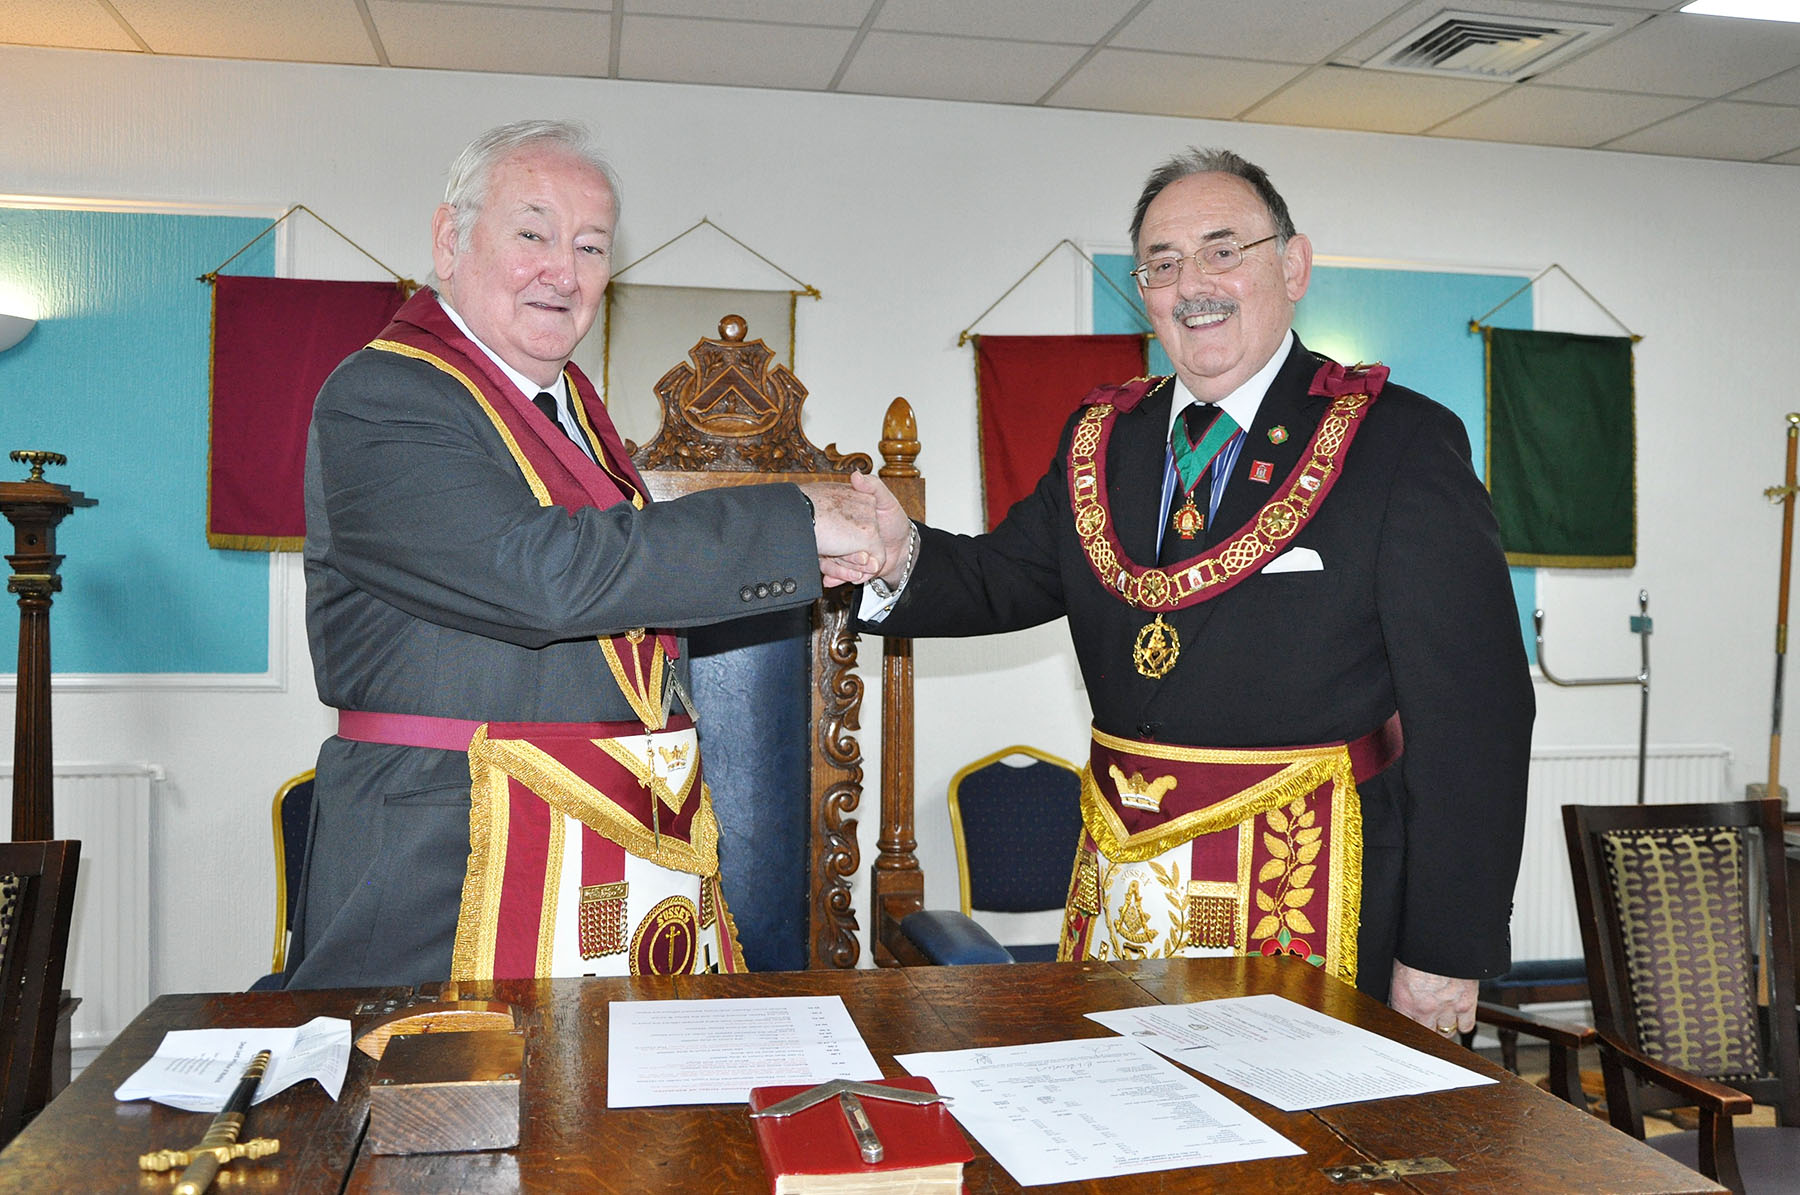 Provincial Grand Master’s visit to Sword of Constantine Court